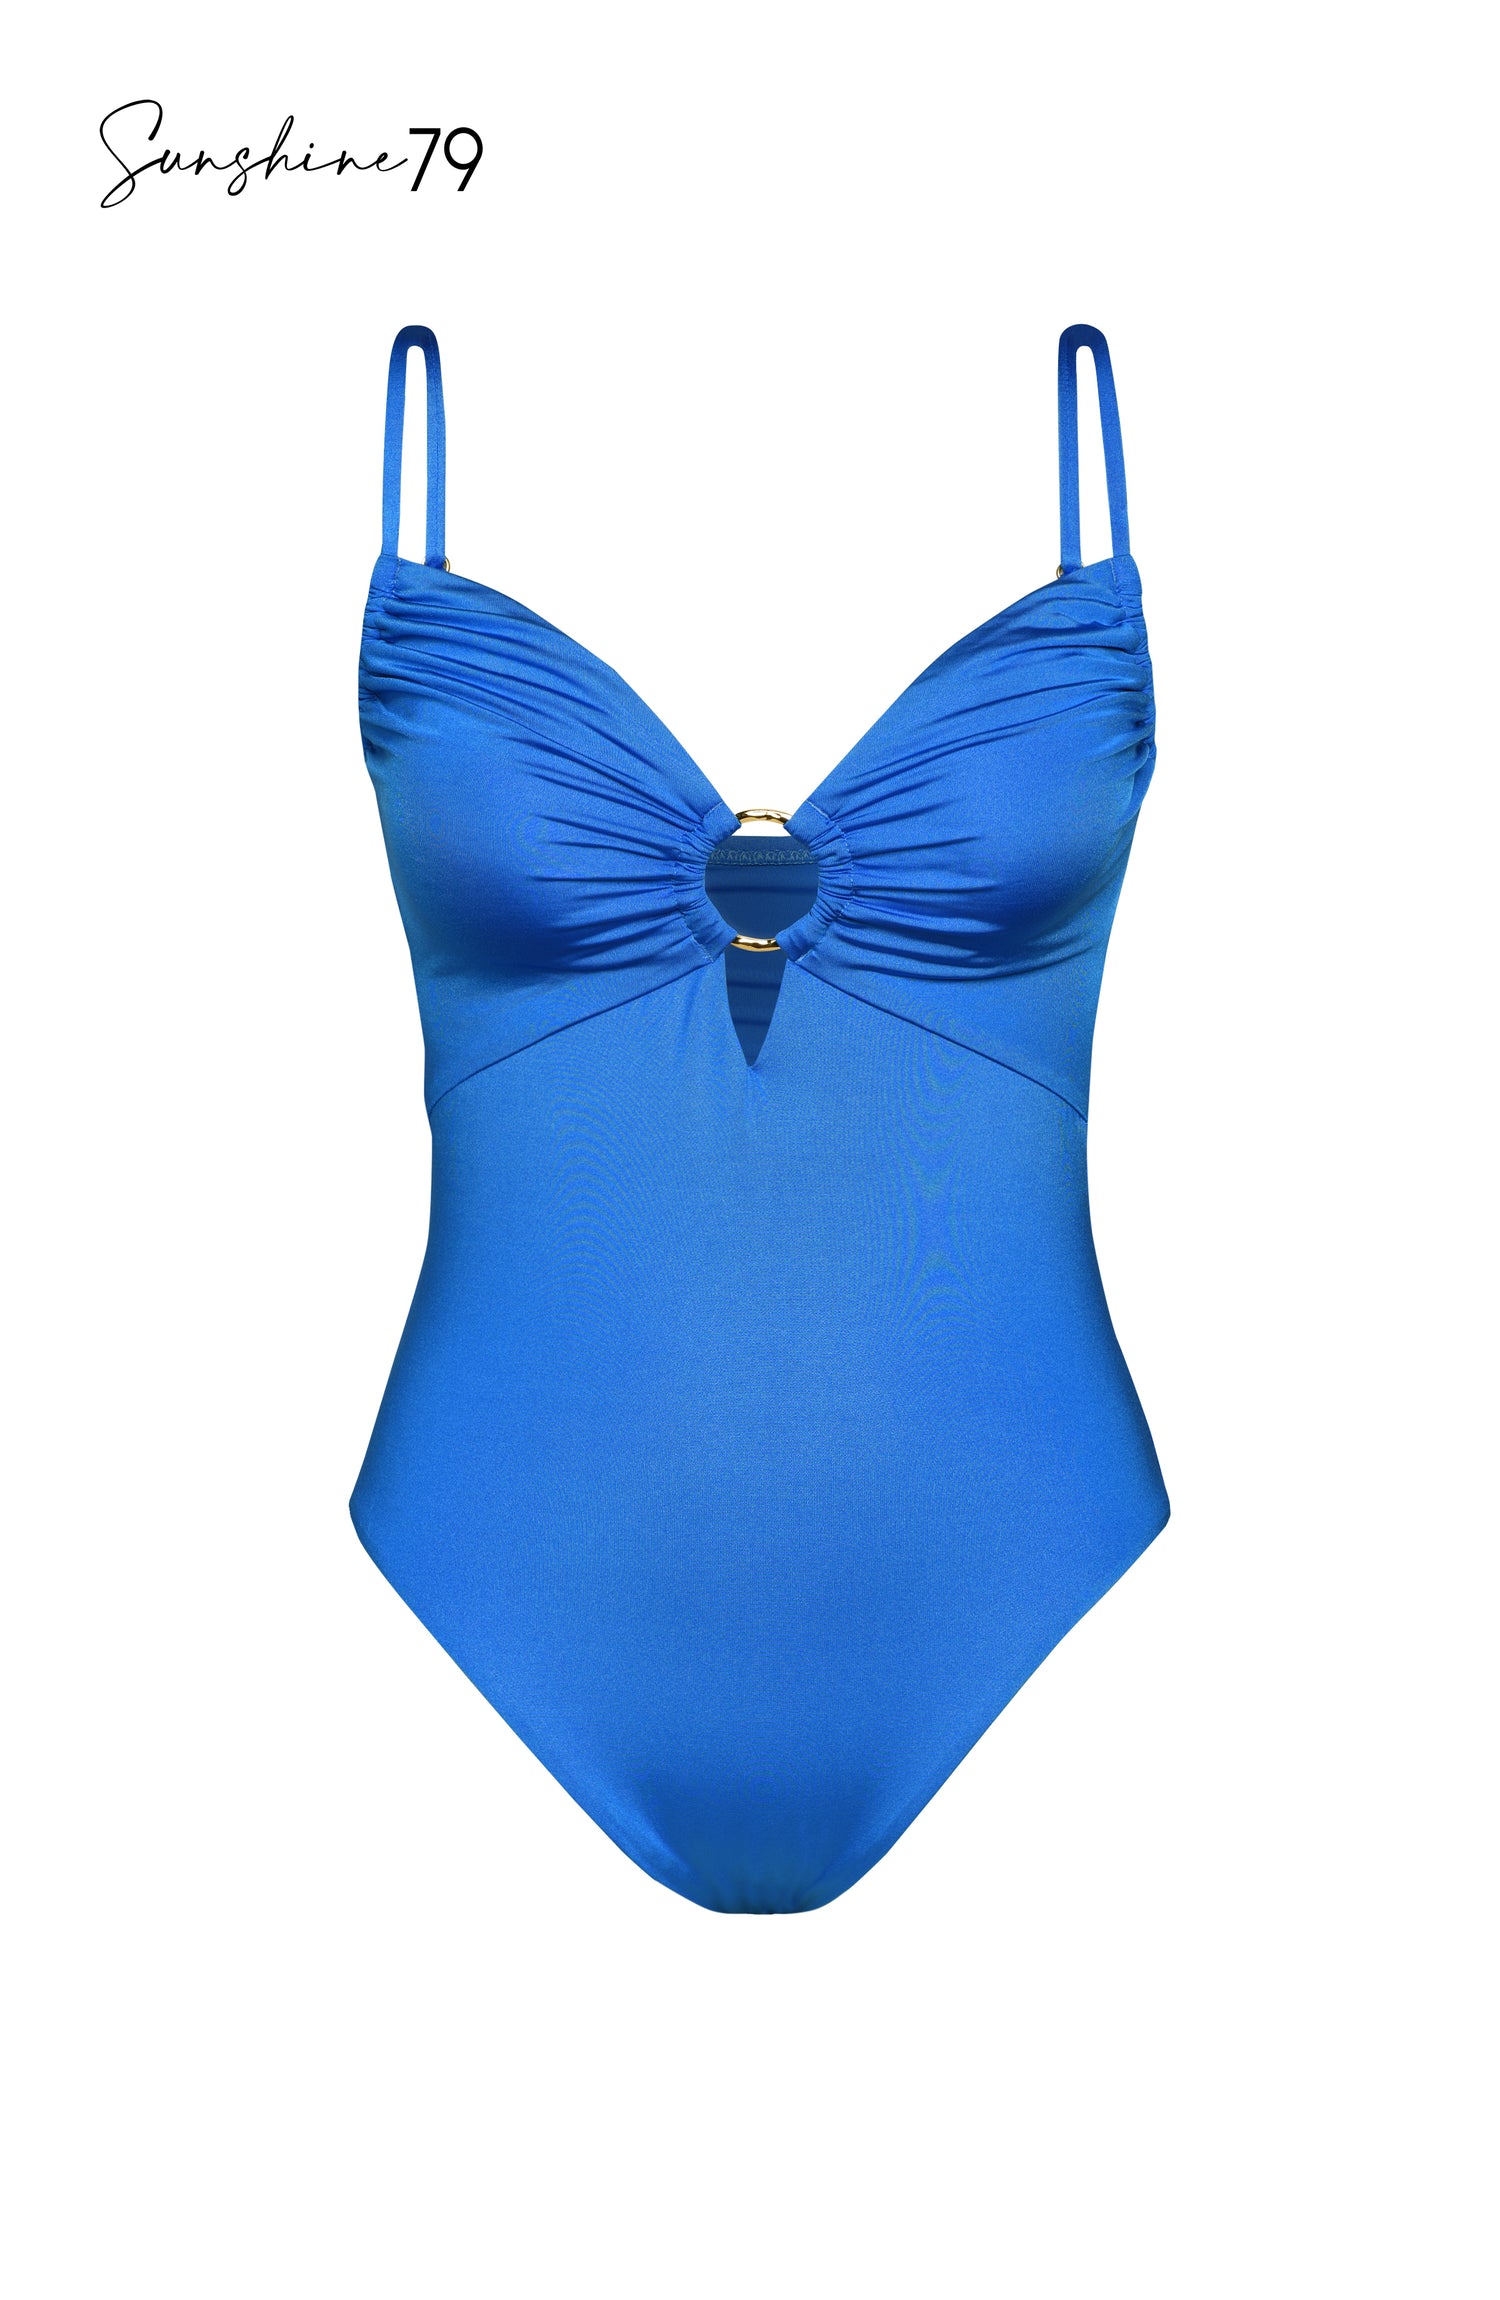 Model is wearing a solid cobalt blue colored over the shoulder keyhole one piece from our Sunshine 79 brand.